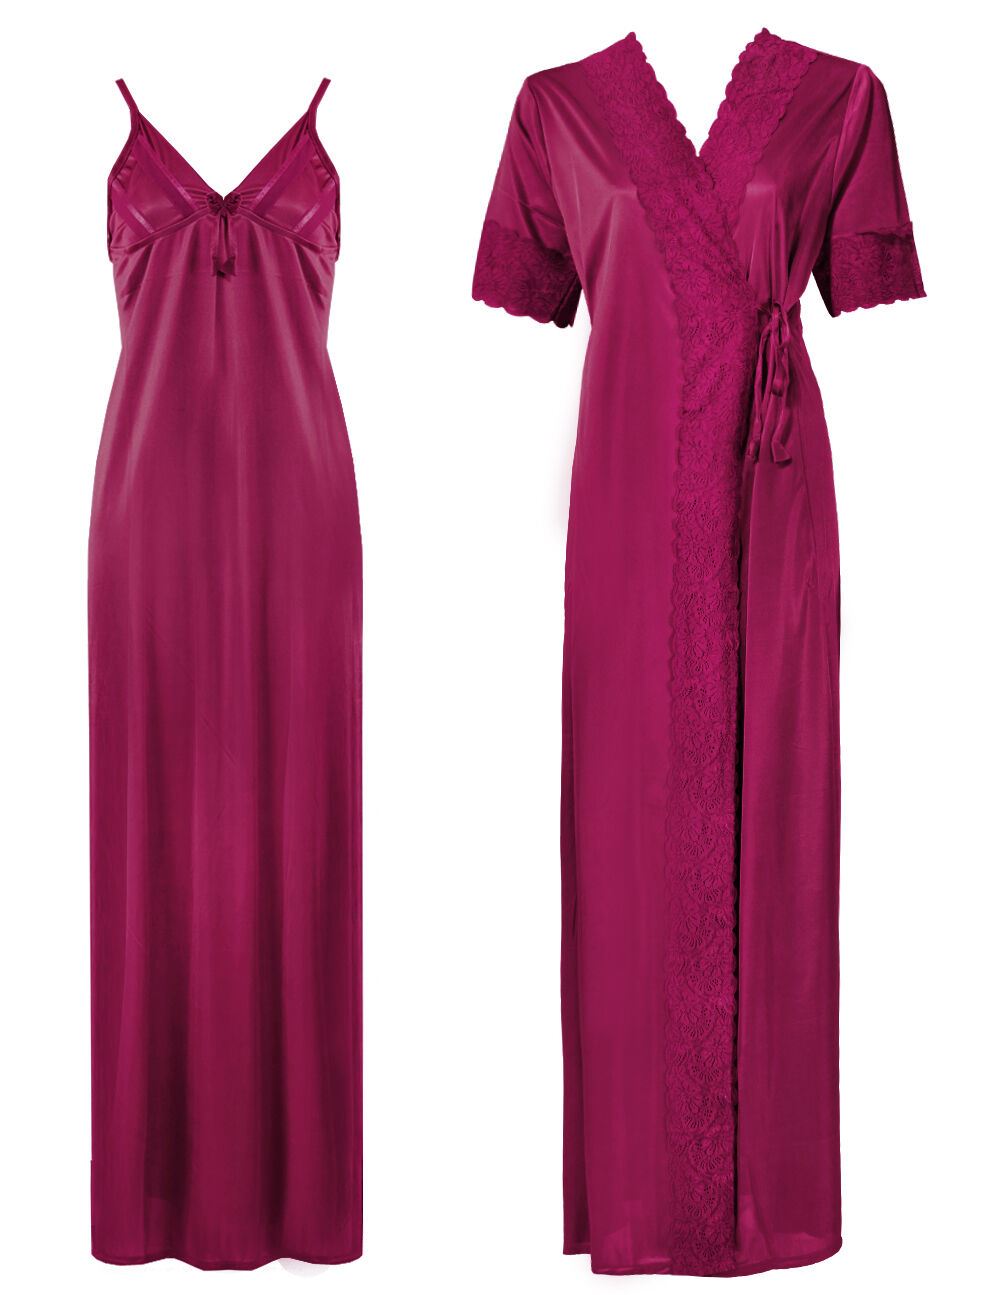 Cerise / One Size: Regular (8-14) Satin Strappy Long Nighty With Dressing Gown / Robe The Orange Tags